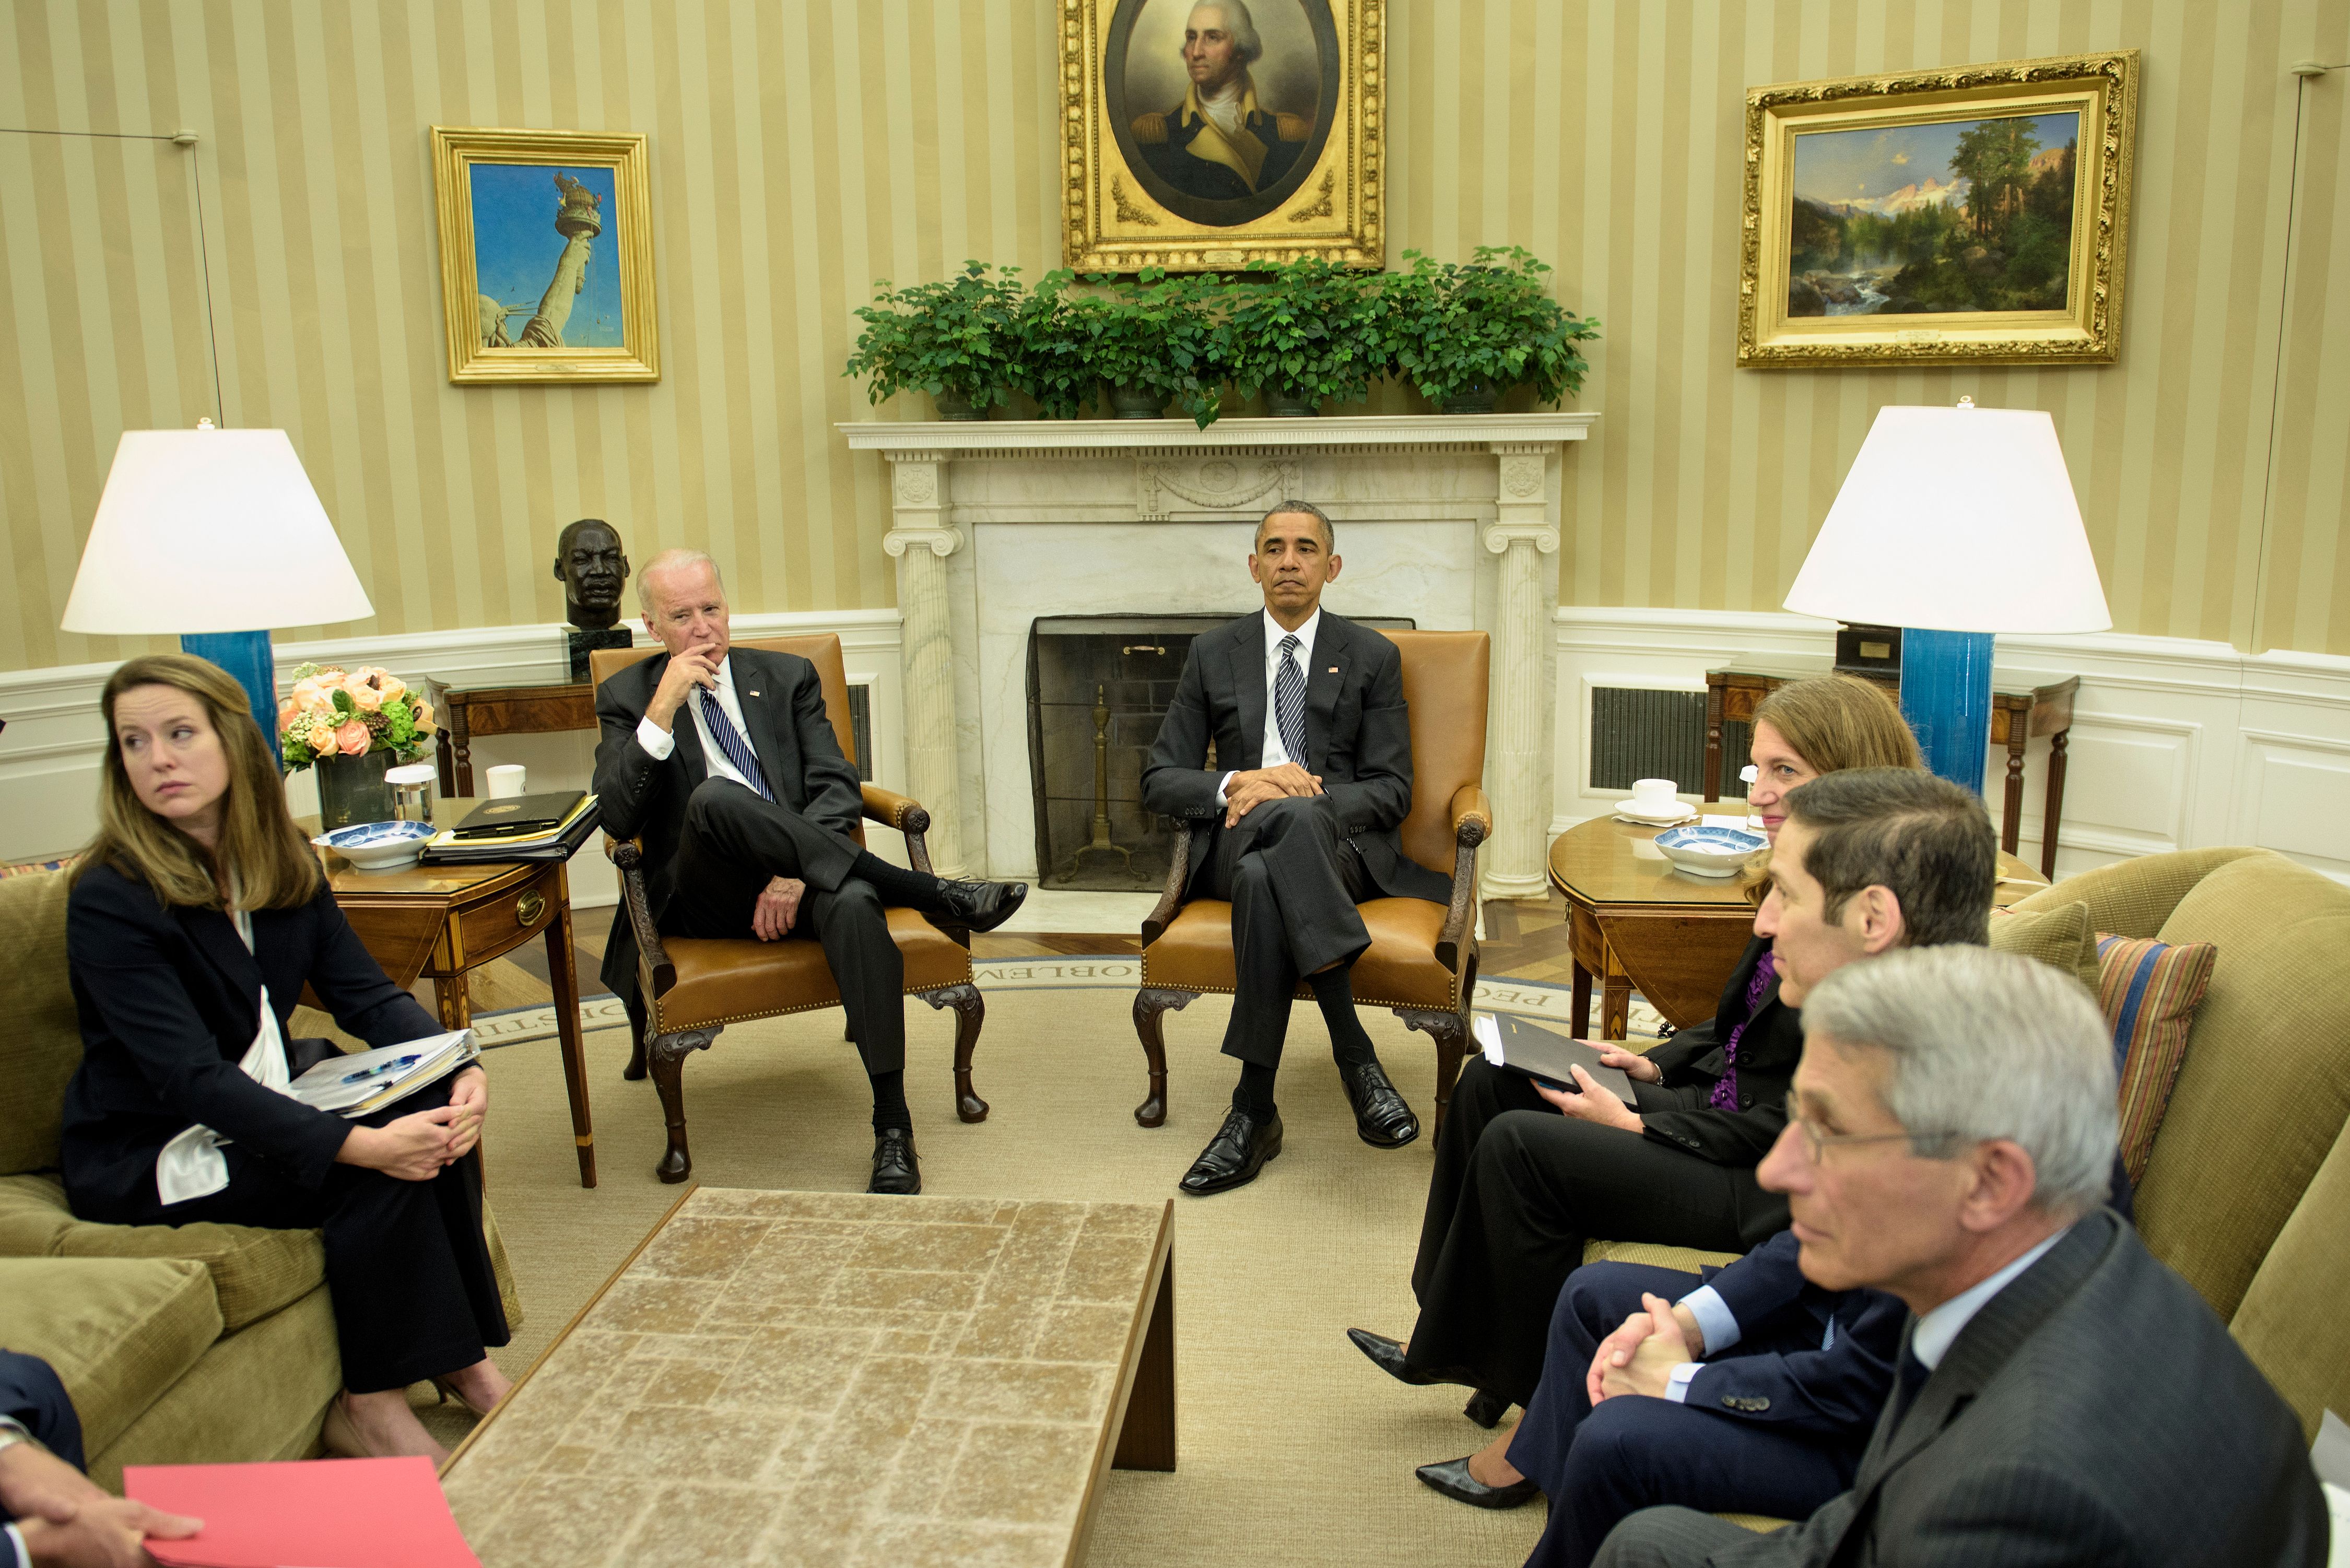 (L-R) Amy Pope, Deputy Homeland Security Advisor, US Vice President Joe R. Biden, US President Barack Obama, US Secretary of Health and Human Services Sylvia Burwell, National Institute of Allergy and Infectious Diseases Director Dr. Anthony Fauci, and Centers for Disease Control and Prevention Director Dr. Tom Frieden wait after a meeting about the Zika virus in the Oval Office of the White House BRENDAN SMIALOWSKI&mdash;AFP/Getty Images (BRENDAN SMIALOWSKI&mdash;AFP/Getty Images)